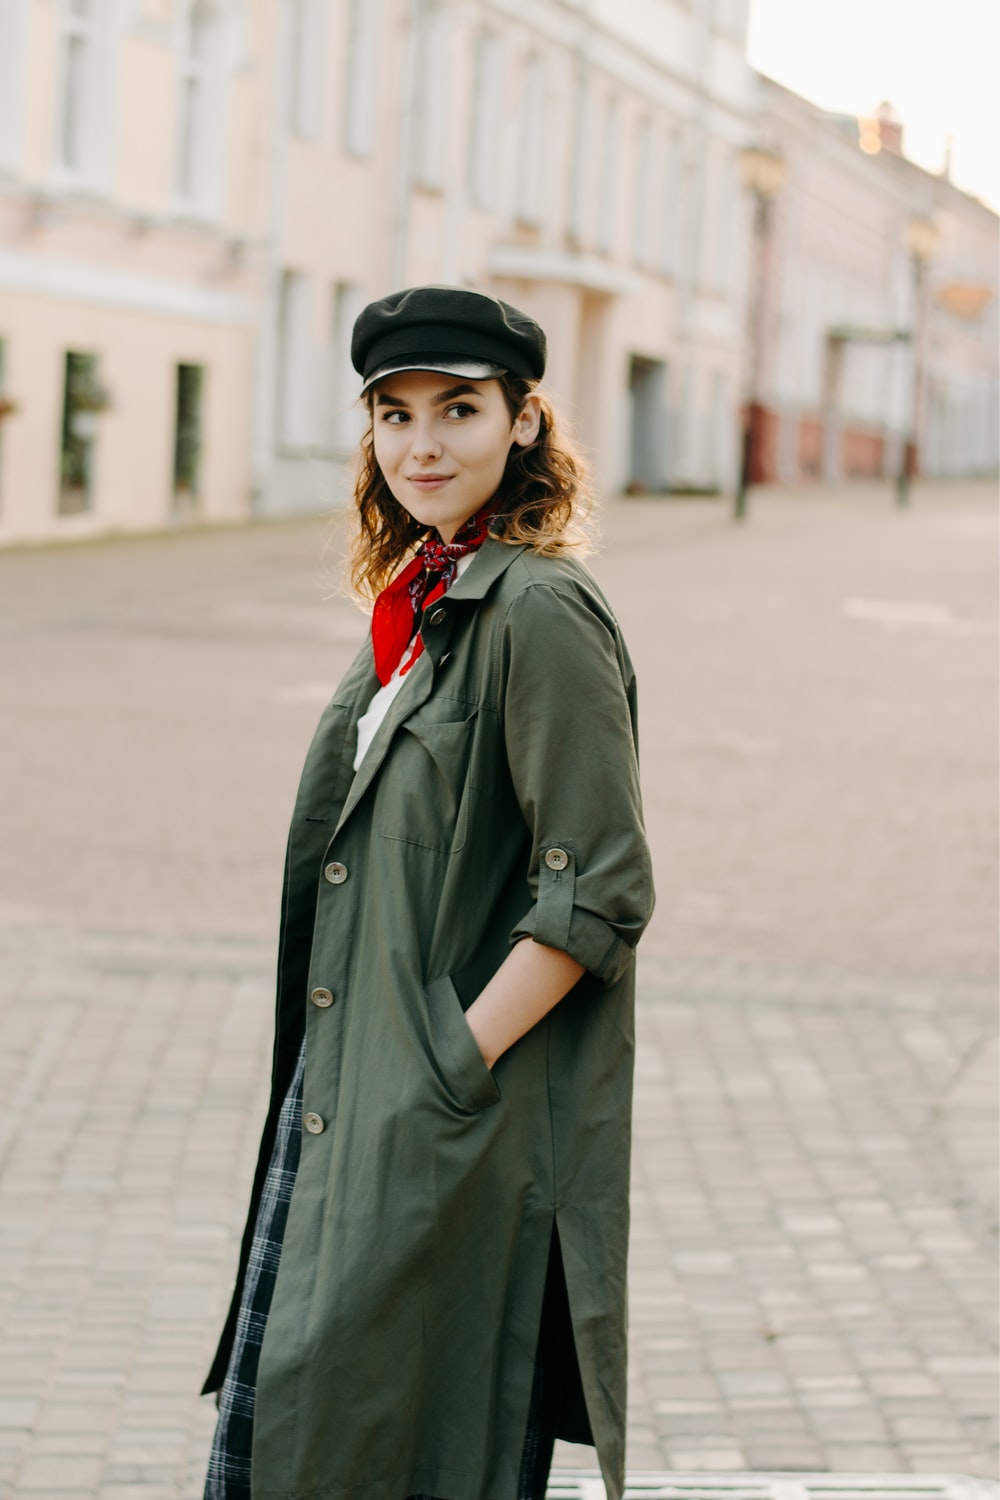 12 Outfit Options for the Women Winter Coats - The Kosha Journal